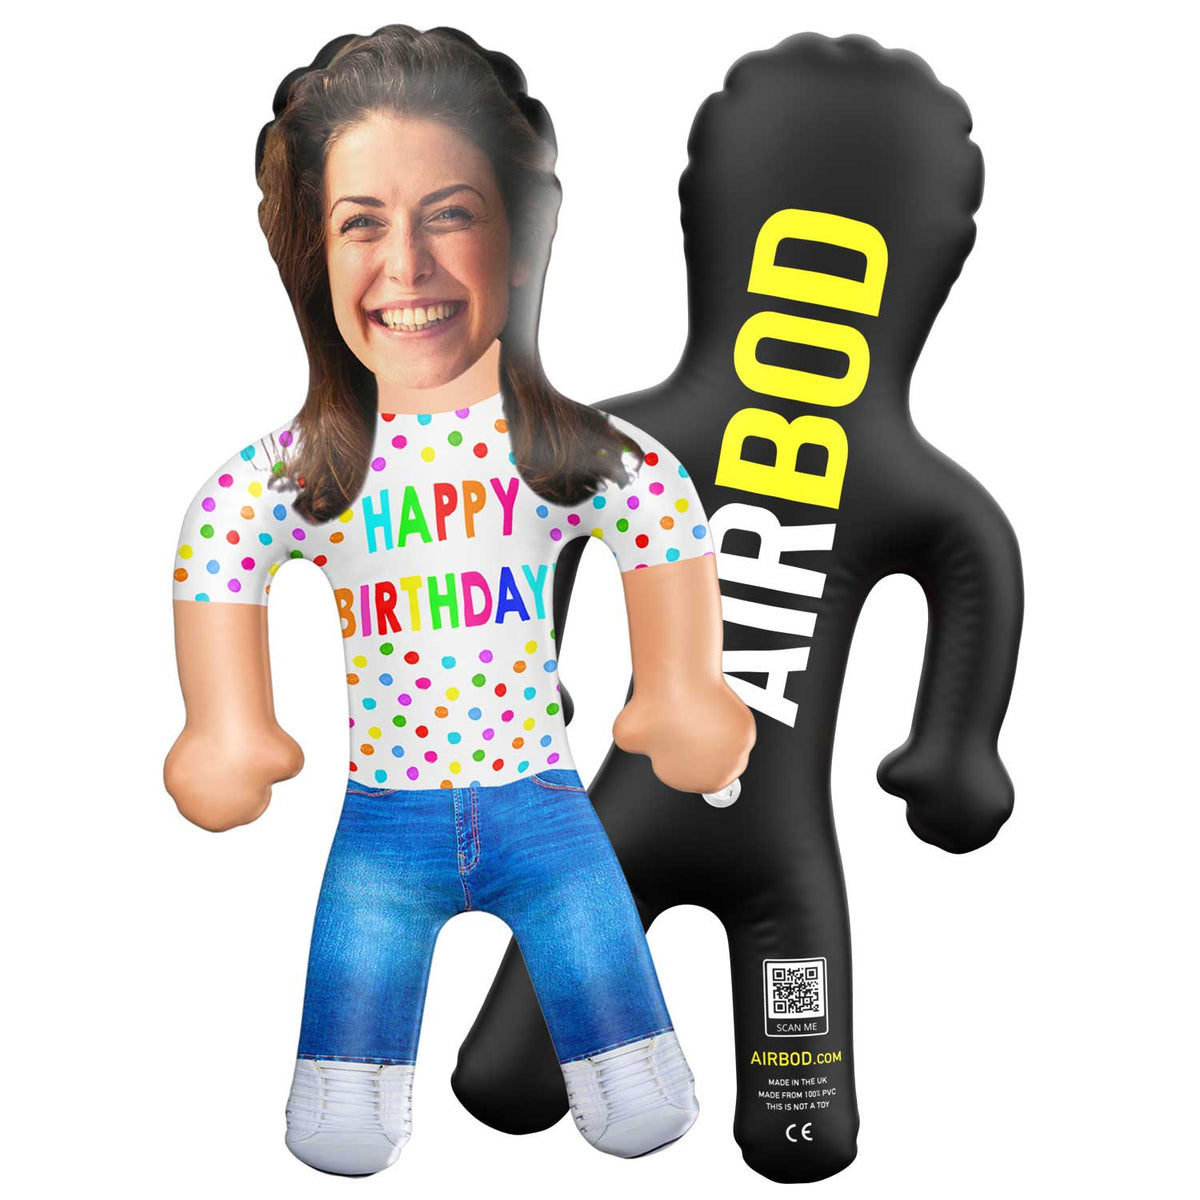 Happy Birthday Inflatable Blow up Doll